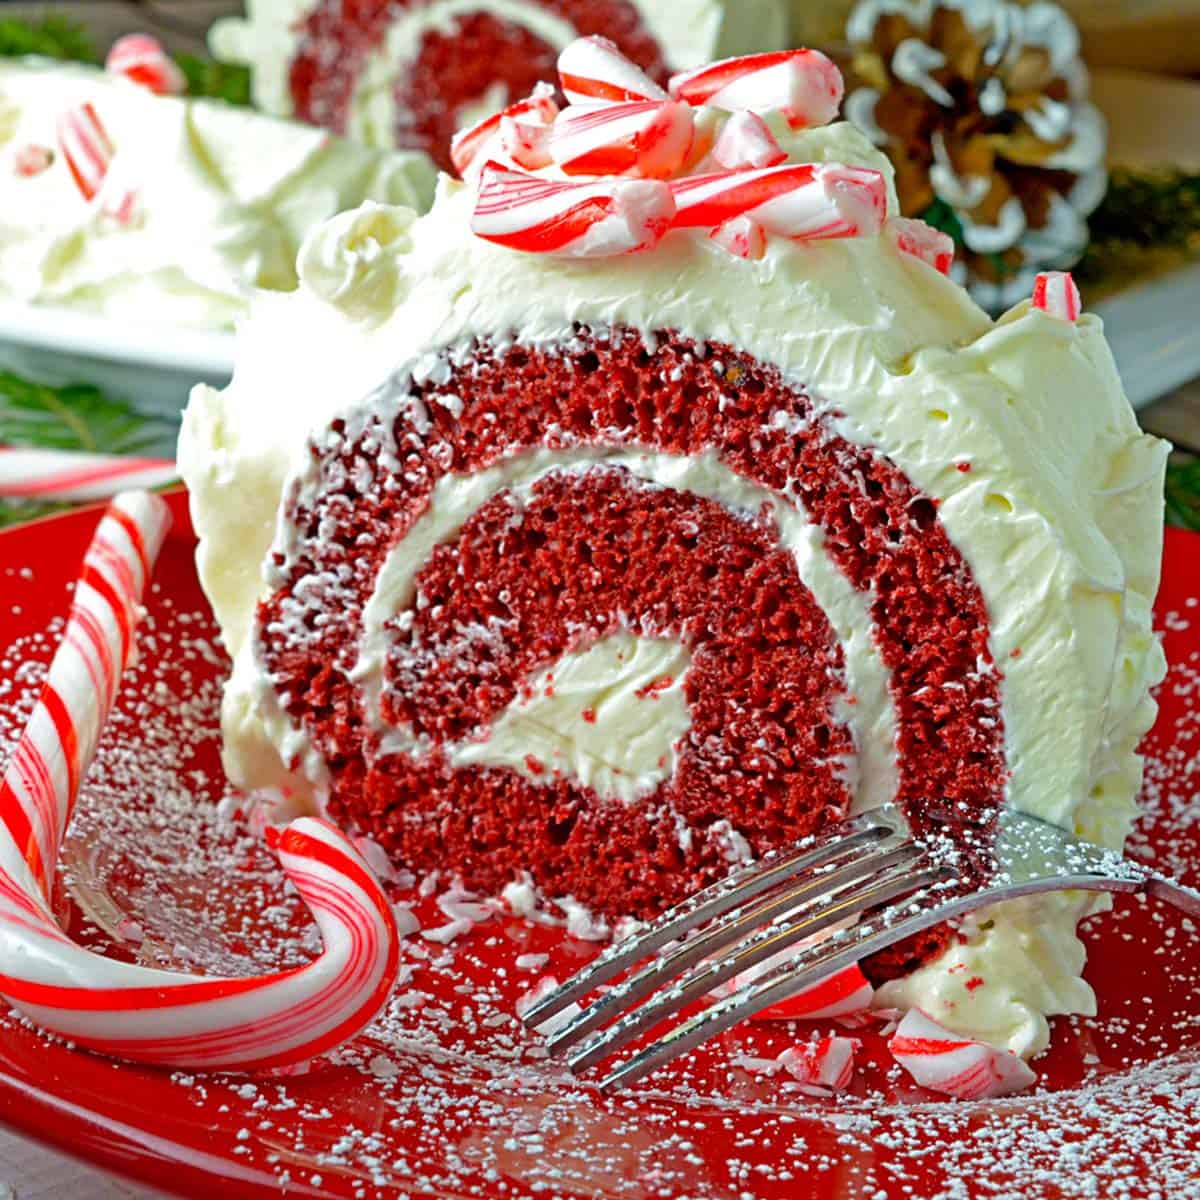 A serving of a red velvet cake roll and a candy cane on a red plate.